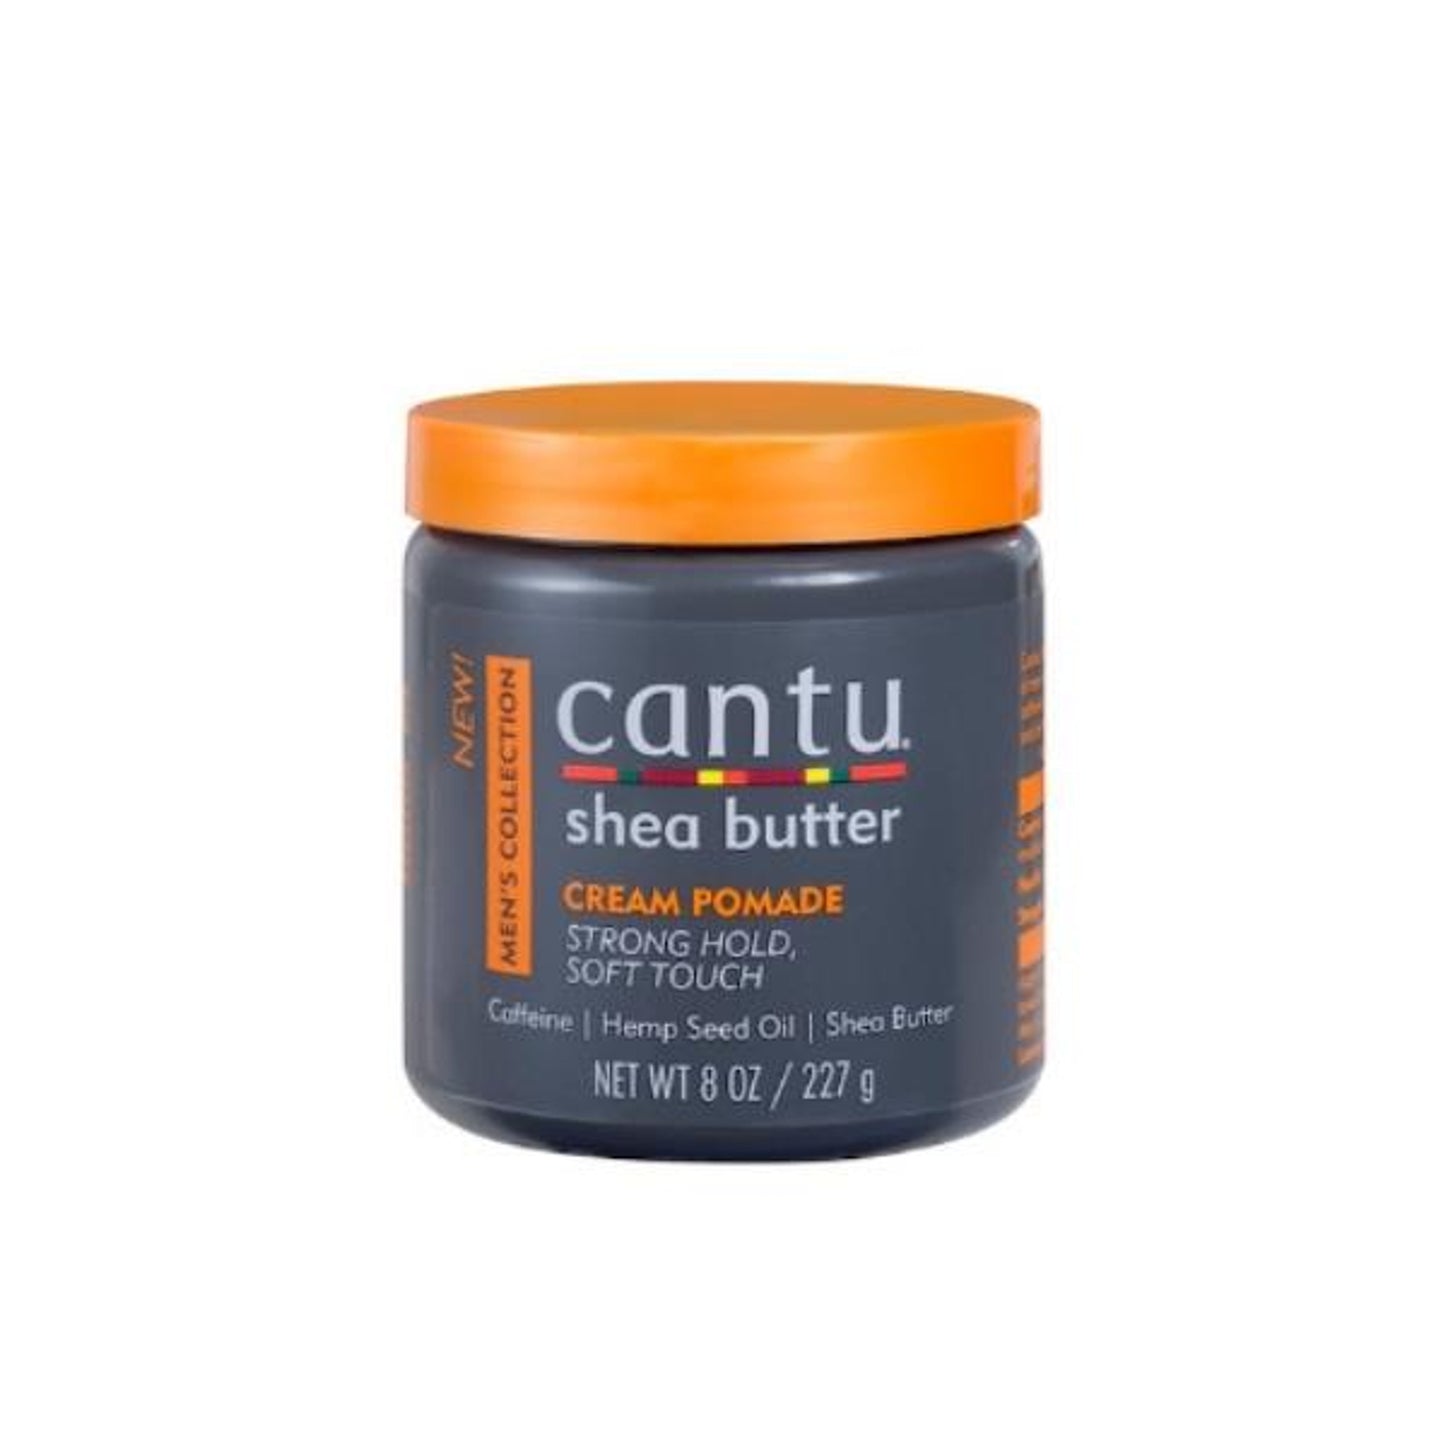 Cantu Shea Butter Cream Pomade Strong Hold Soft Touch - 8oz